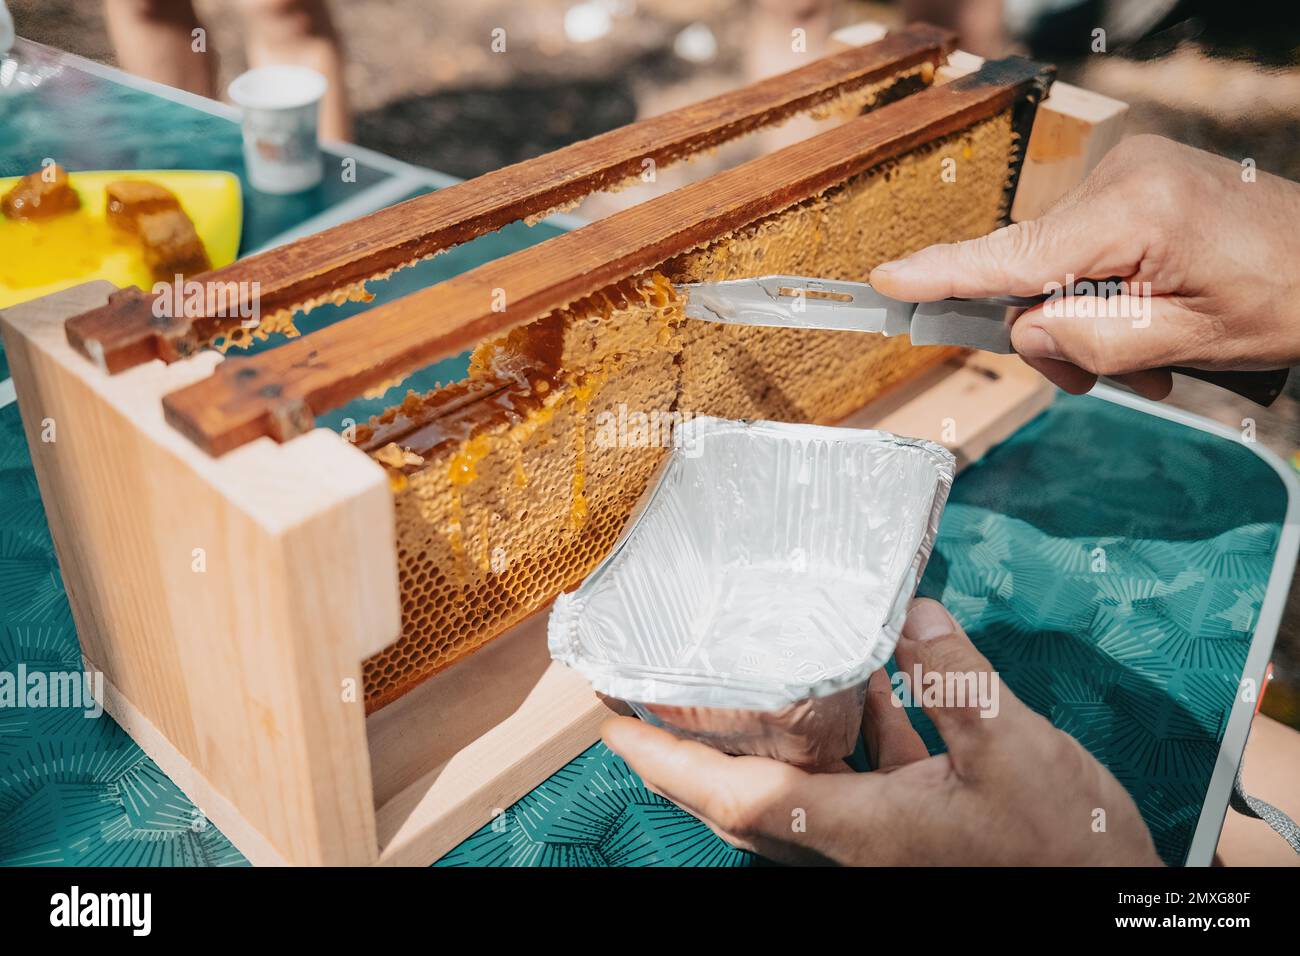 Knife cuts off sealed honeycomb and sweet honey flows out of it. Production of nectar in apiary. Manual labor, insect care. Beekeeping culture concept Stock Photo